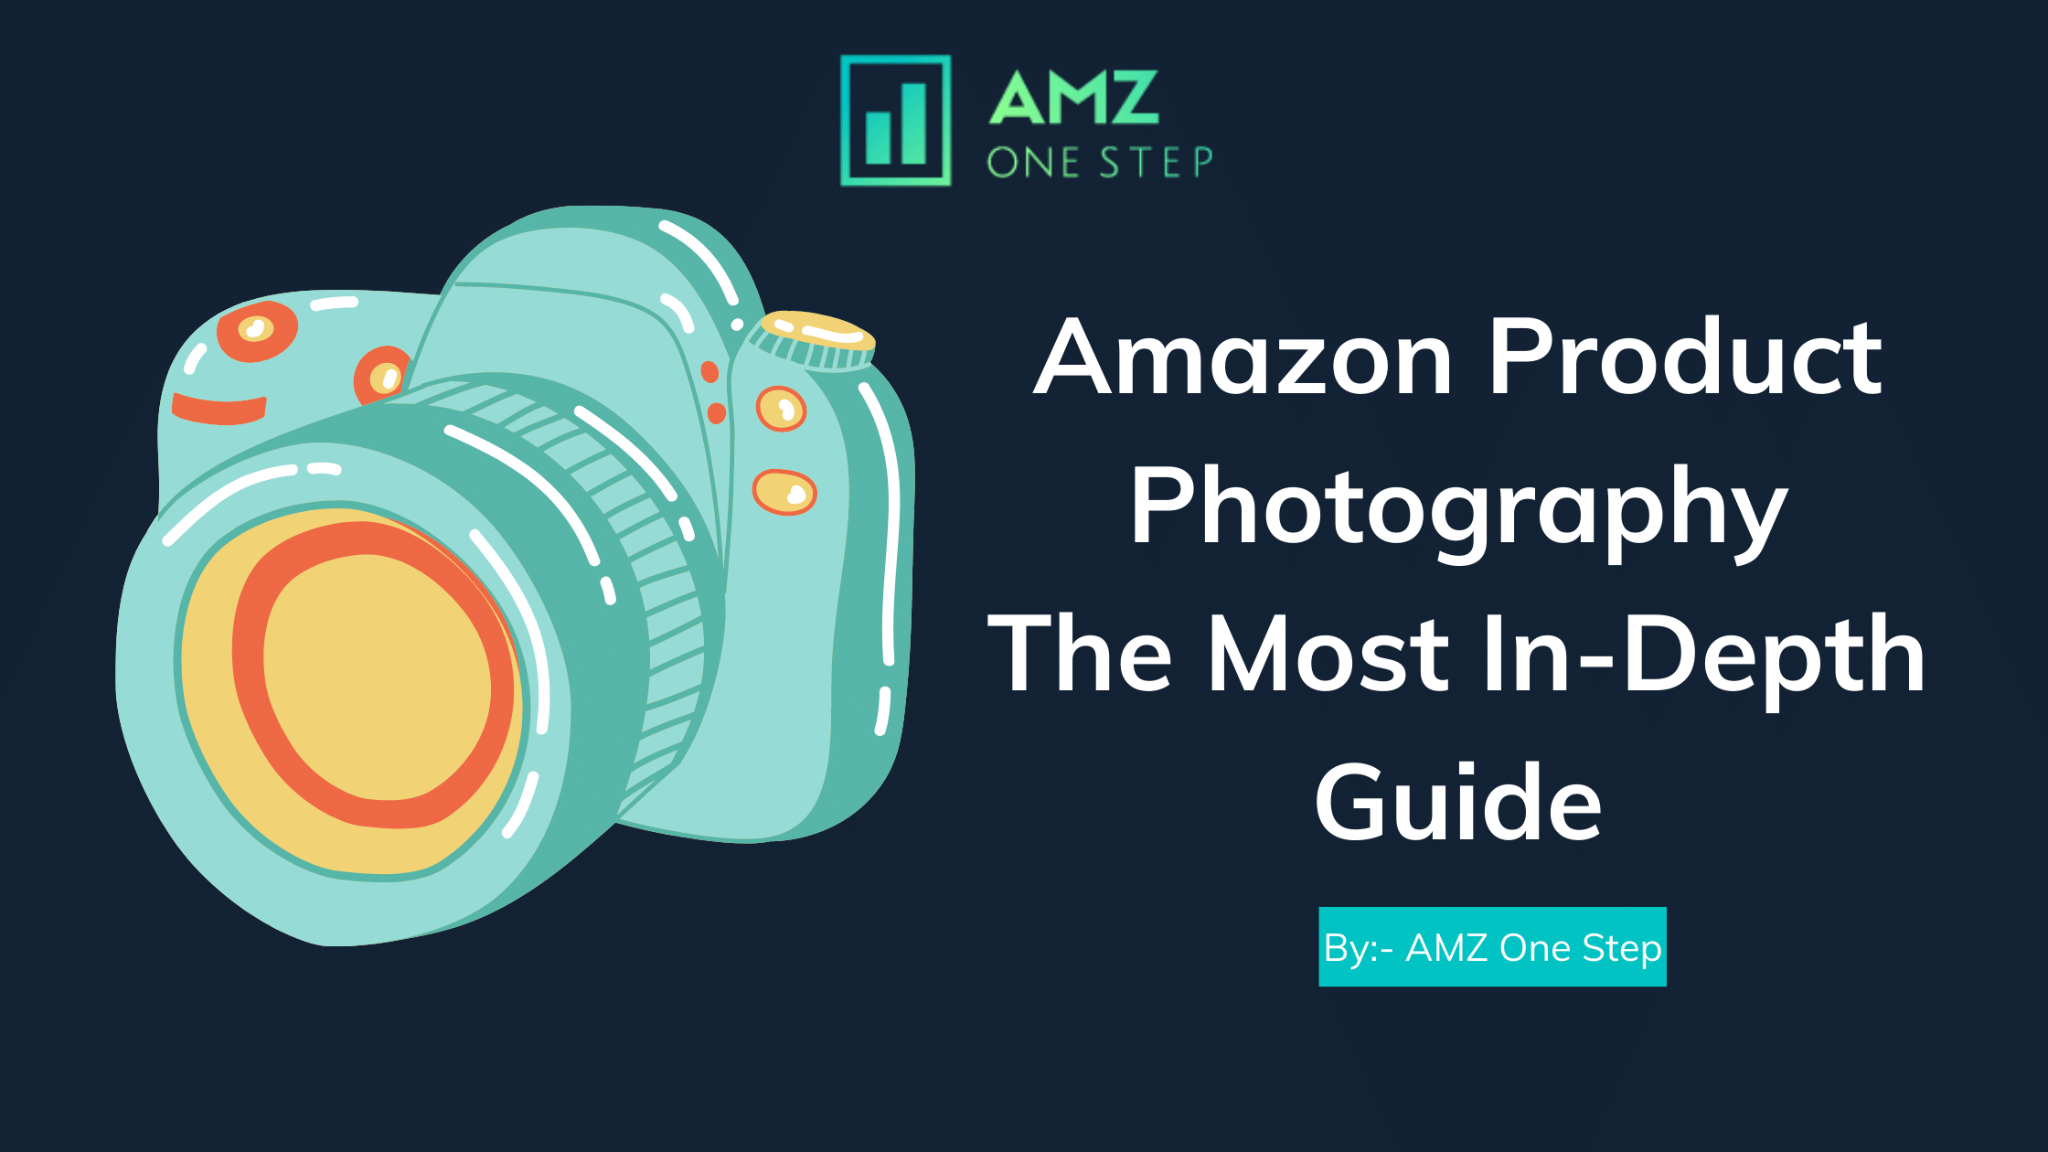 The Last Guide To Amazon Product Photography You Will Ever Need!